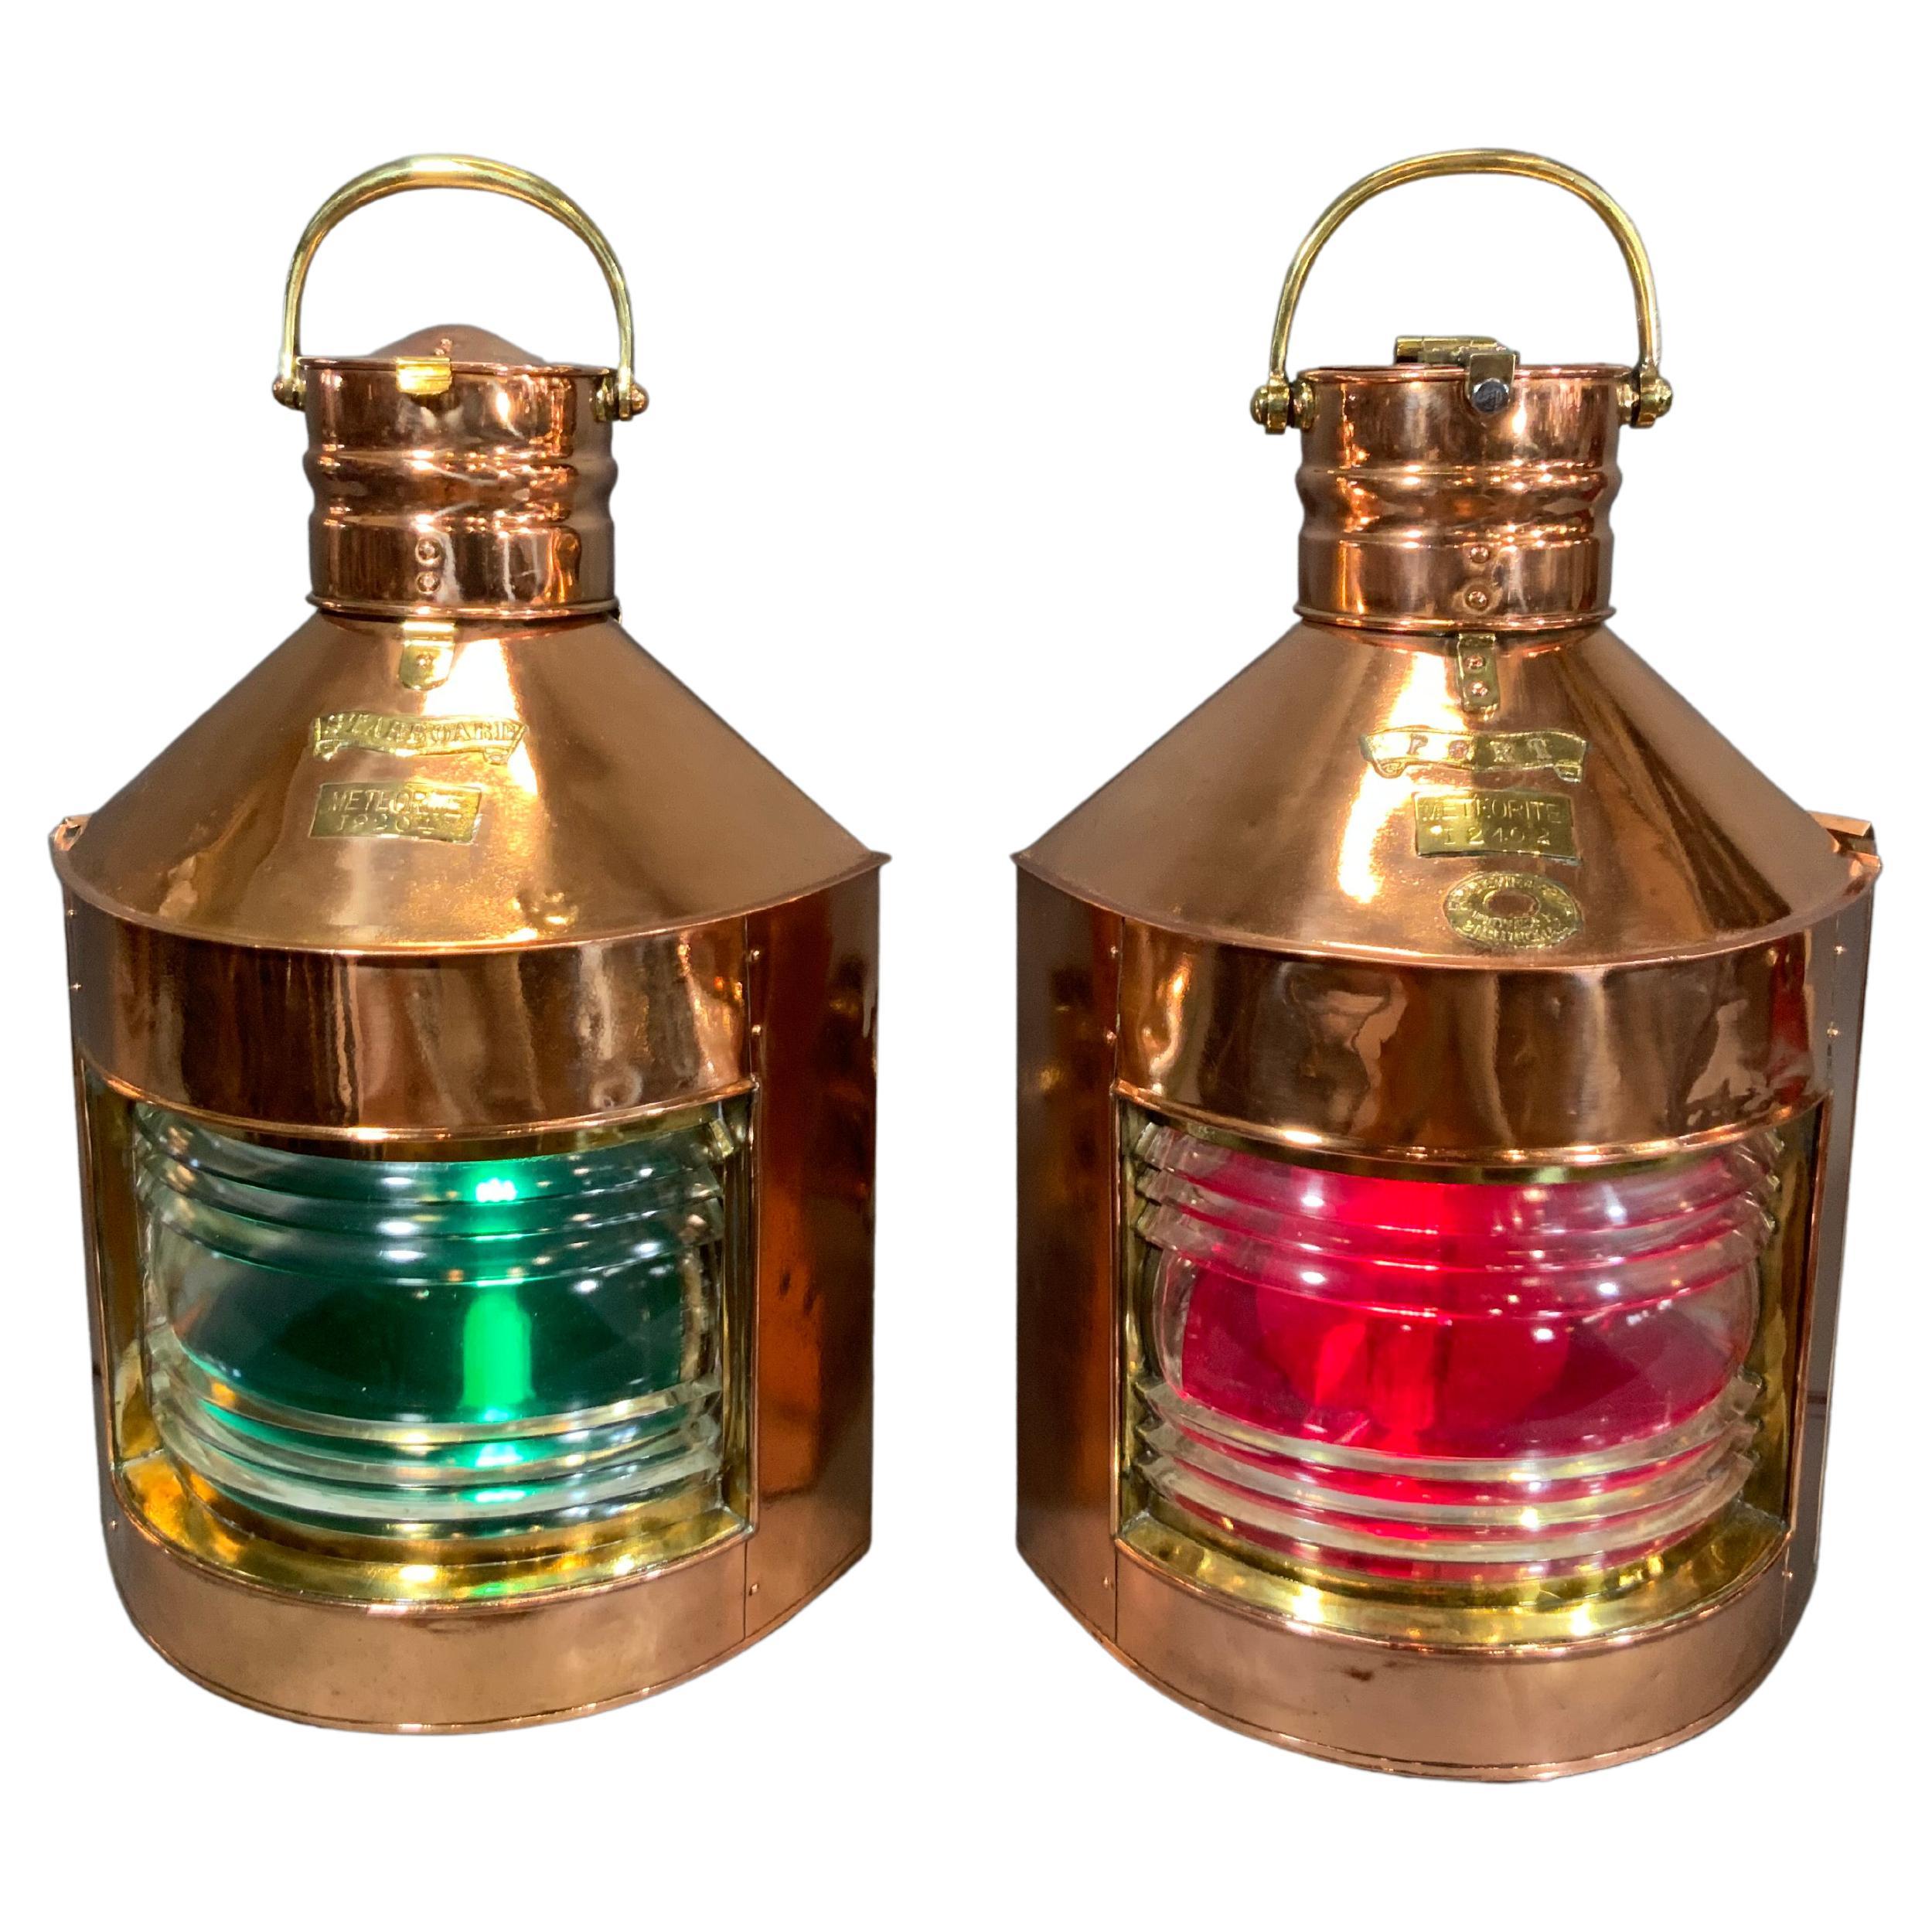 Giant Pair of Copper Port & Starboard Ships Lanterns by Meteorite, 12402 & 19204 For Sale